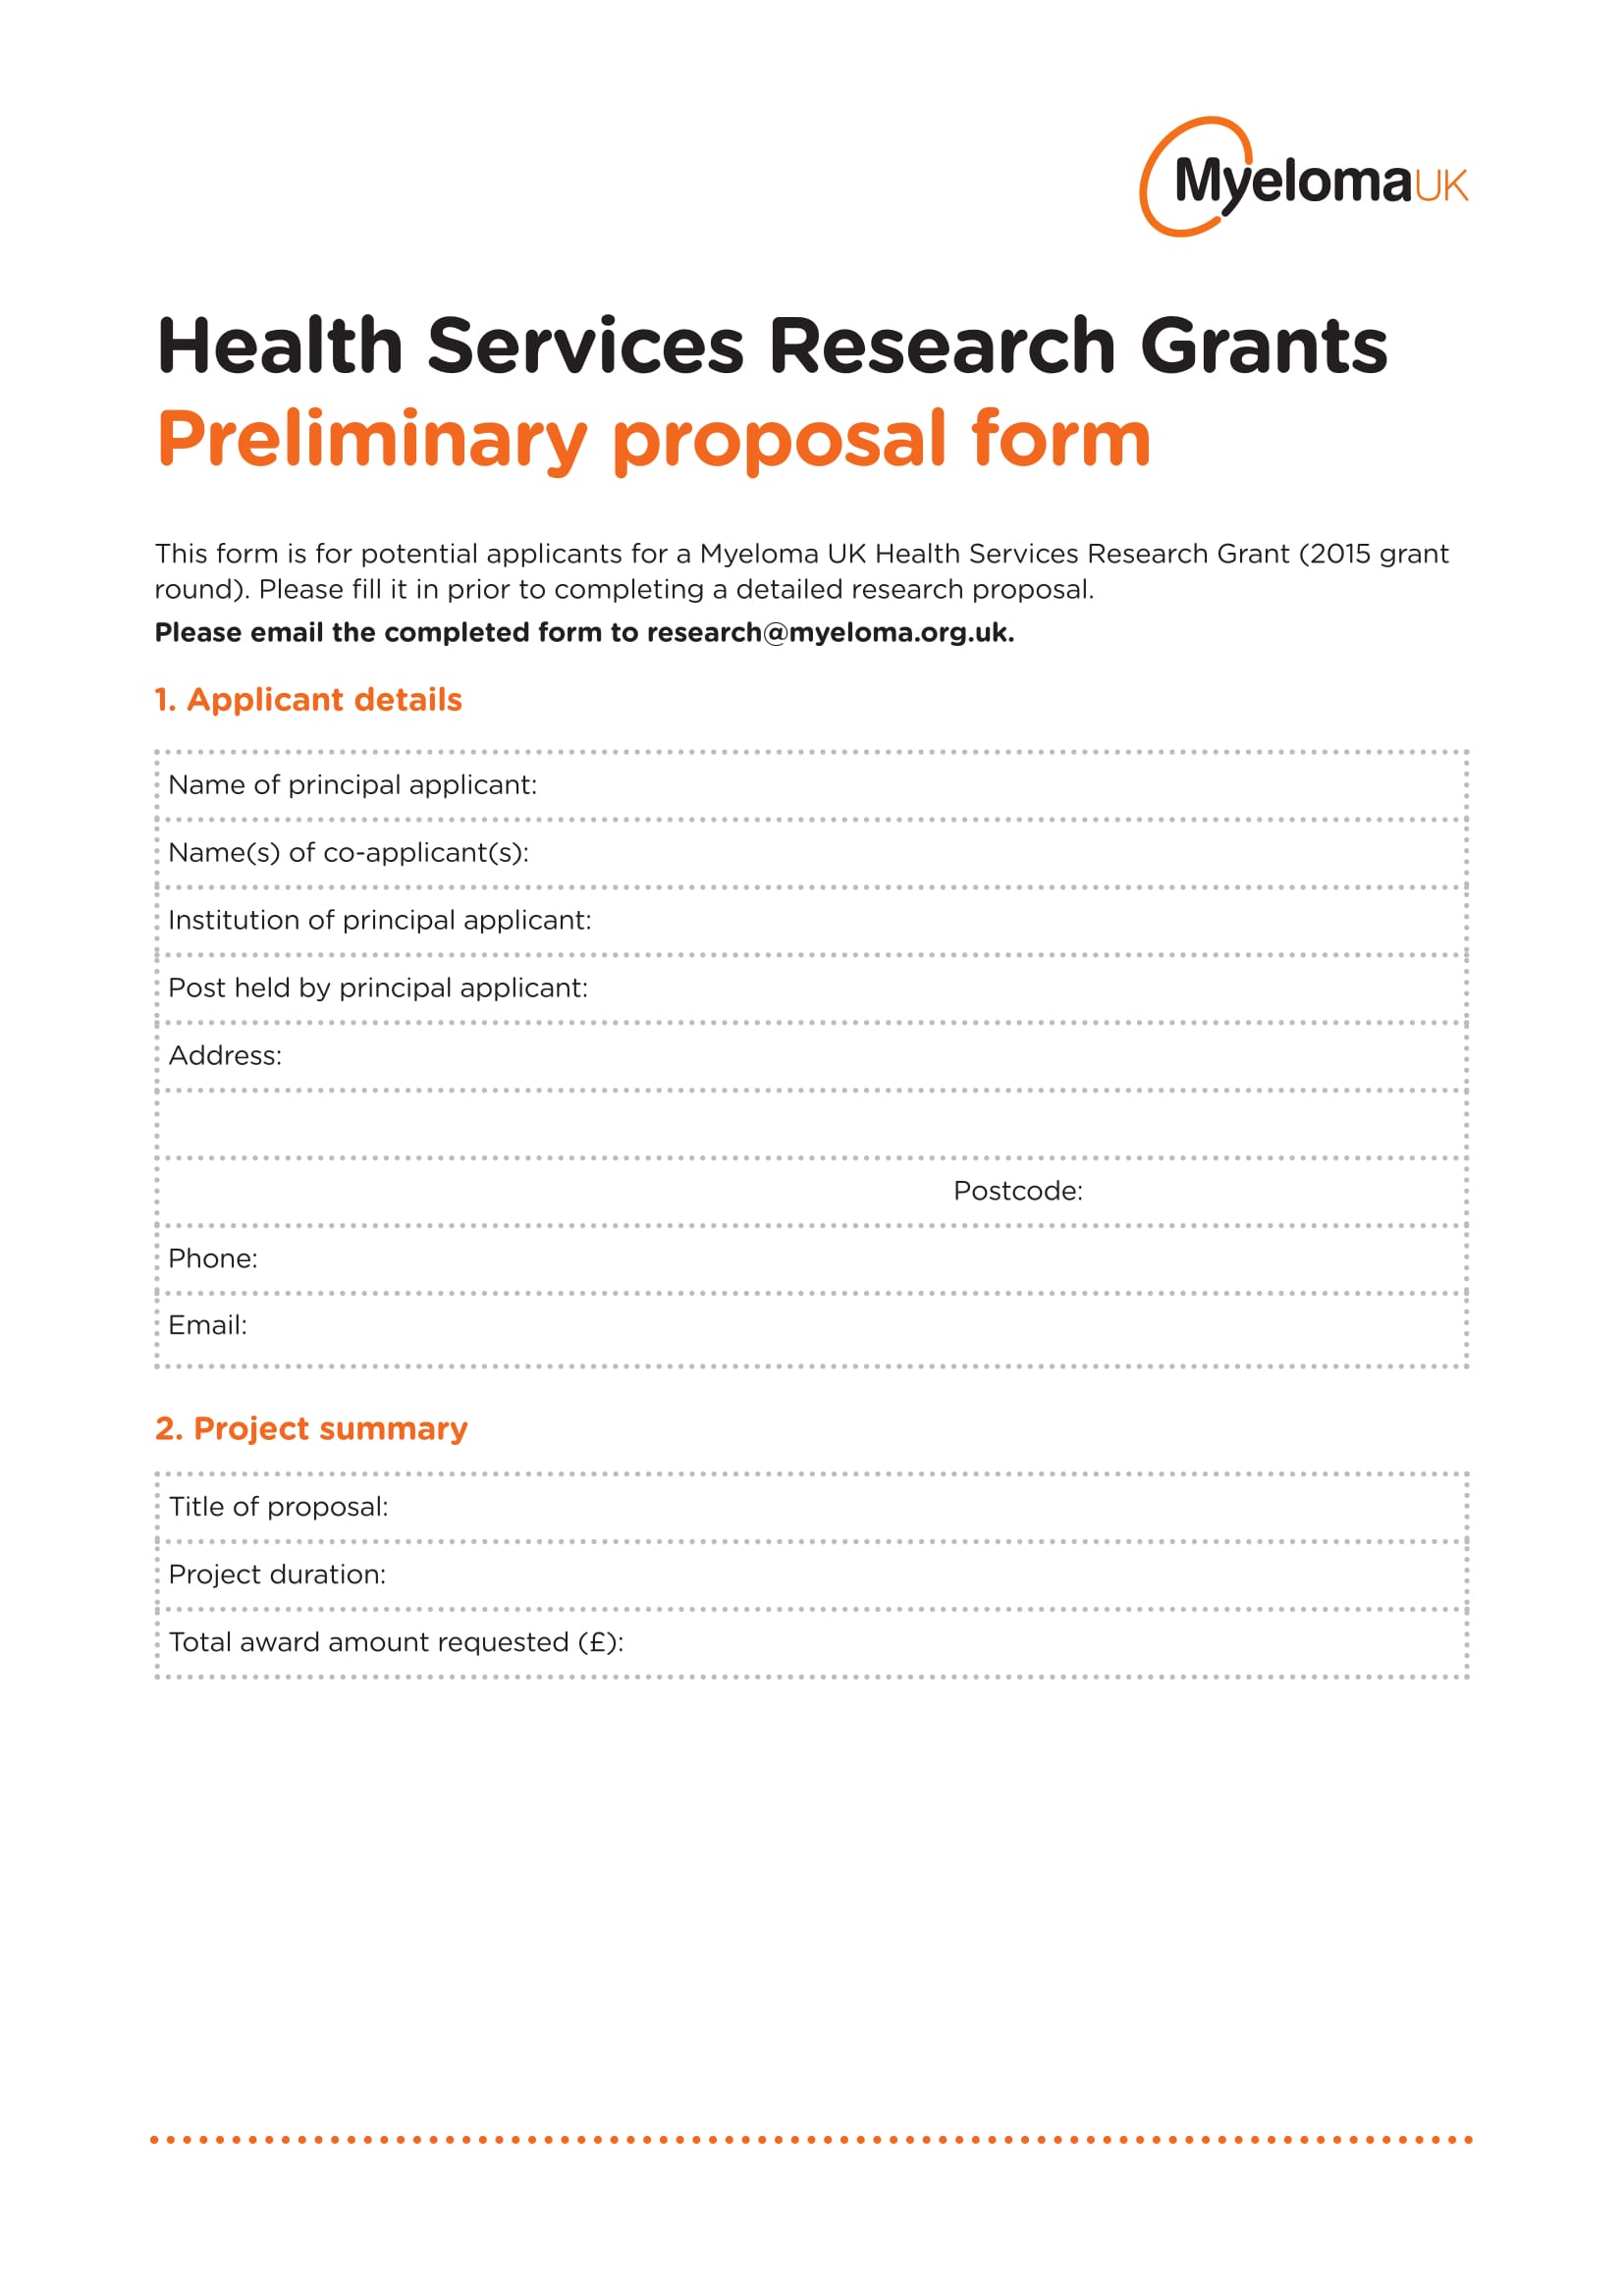 preliminary research proposal form 1